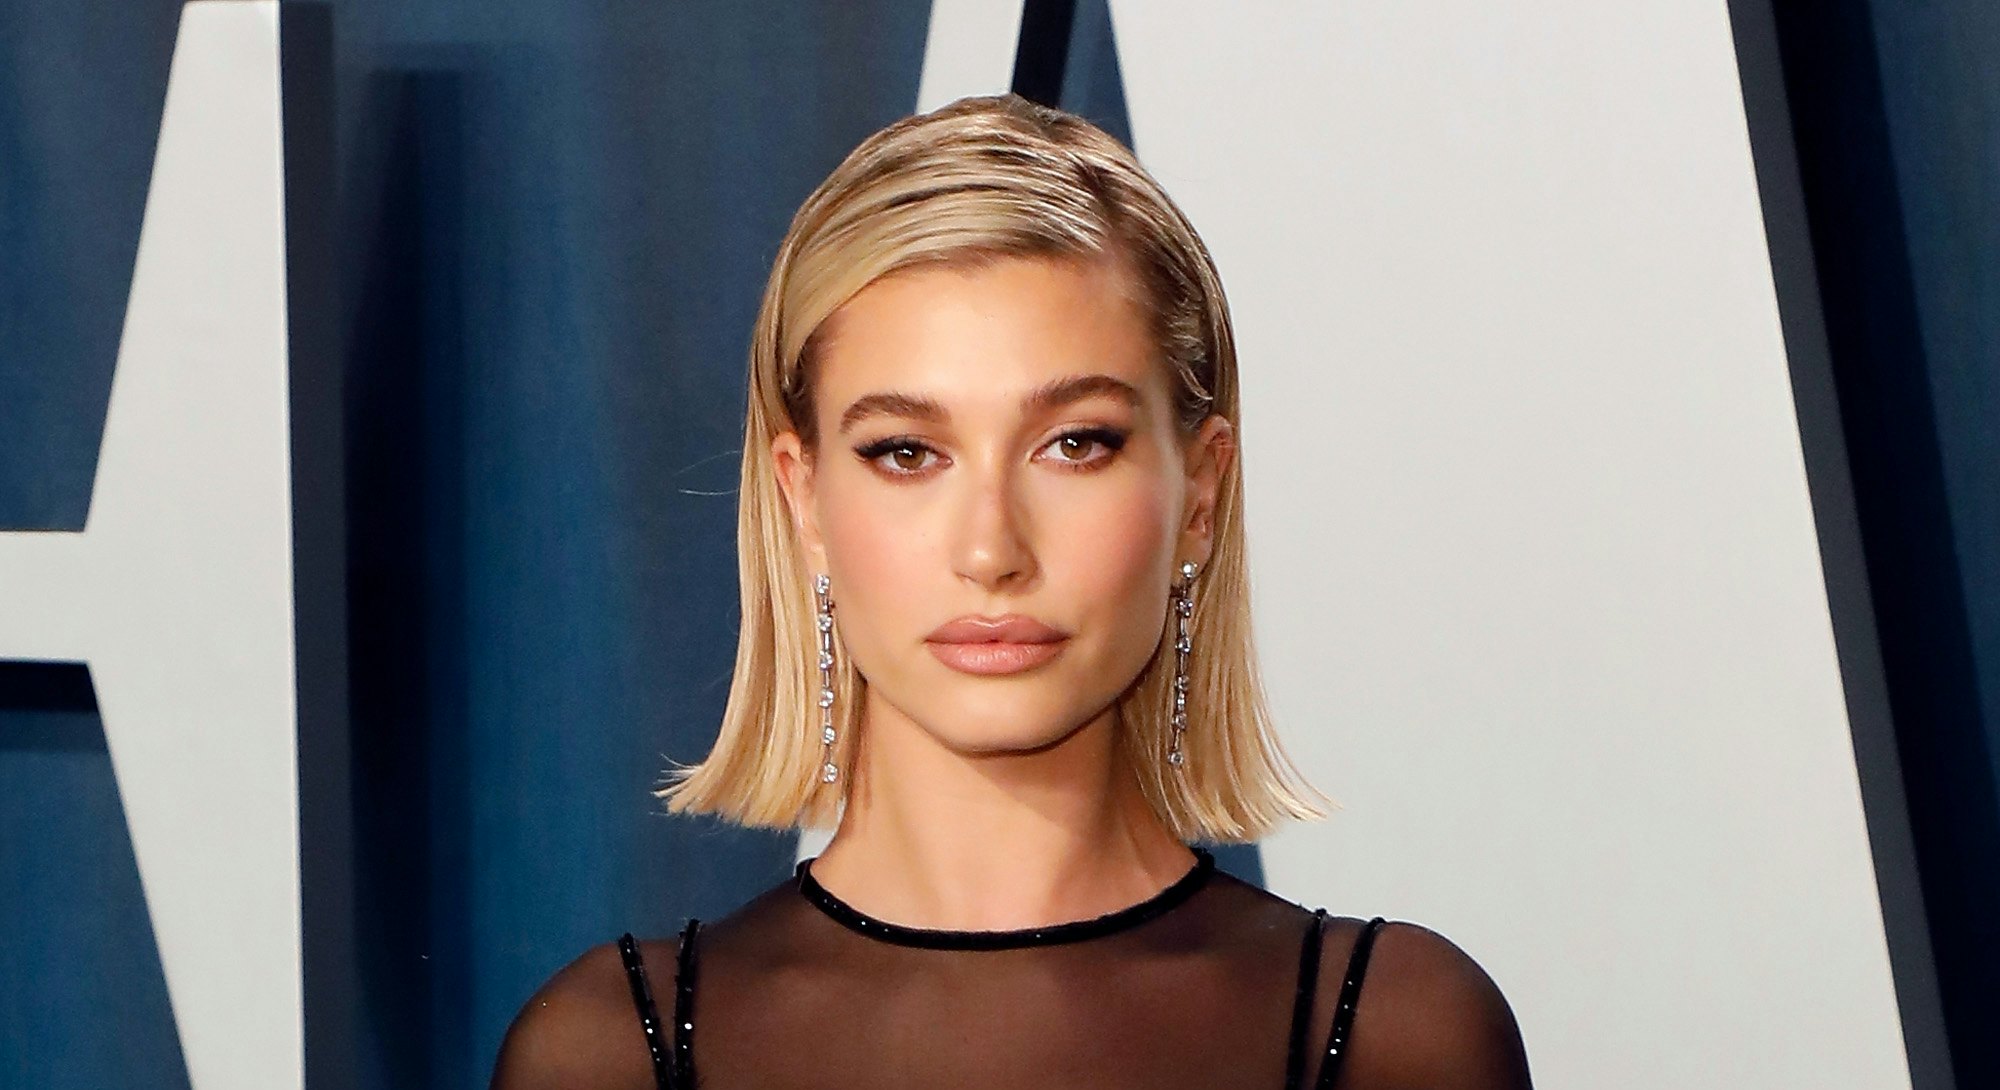 Hailey Bieber's Britney Spears costume from Halloween 2021 was one for the books. Shop every look, h...